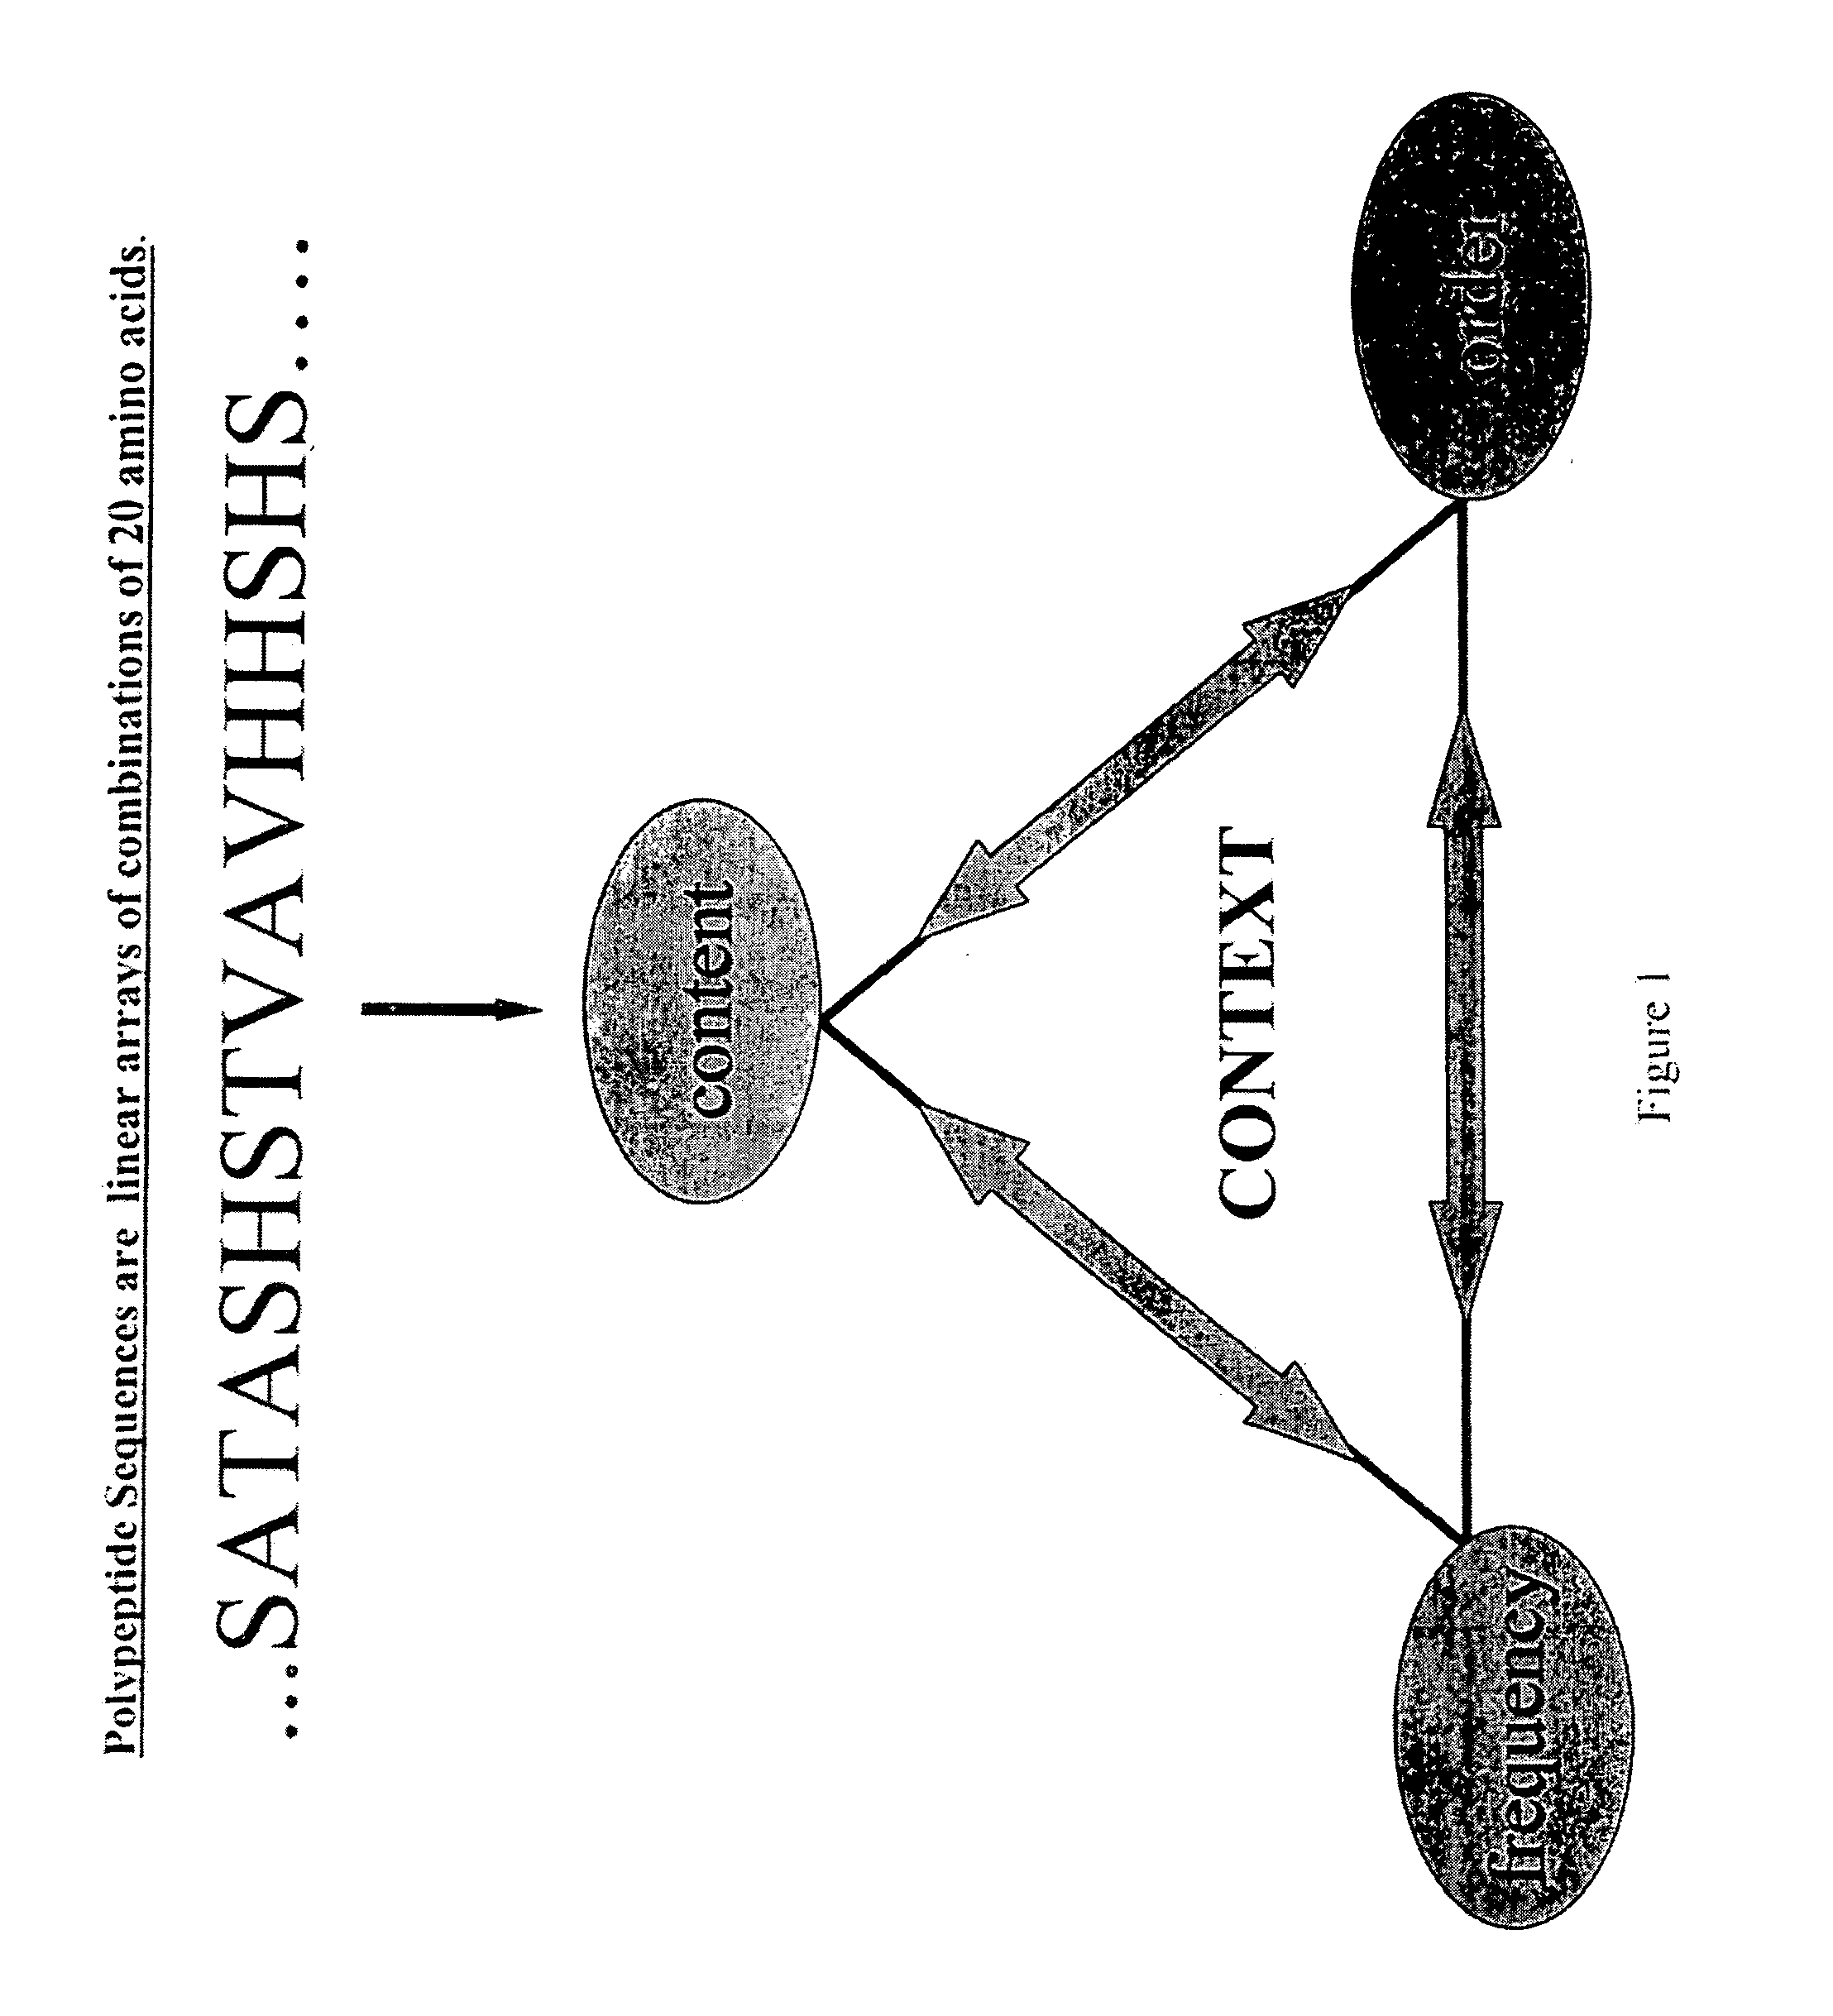 Methods for representing sequence-dependent contextual information present in polymer sequence and uses thereof